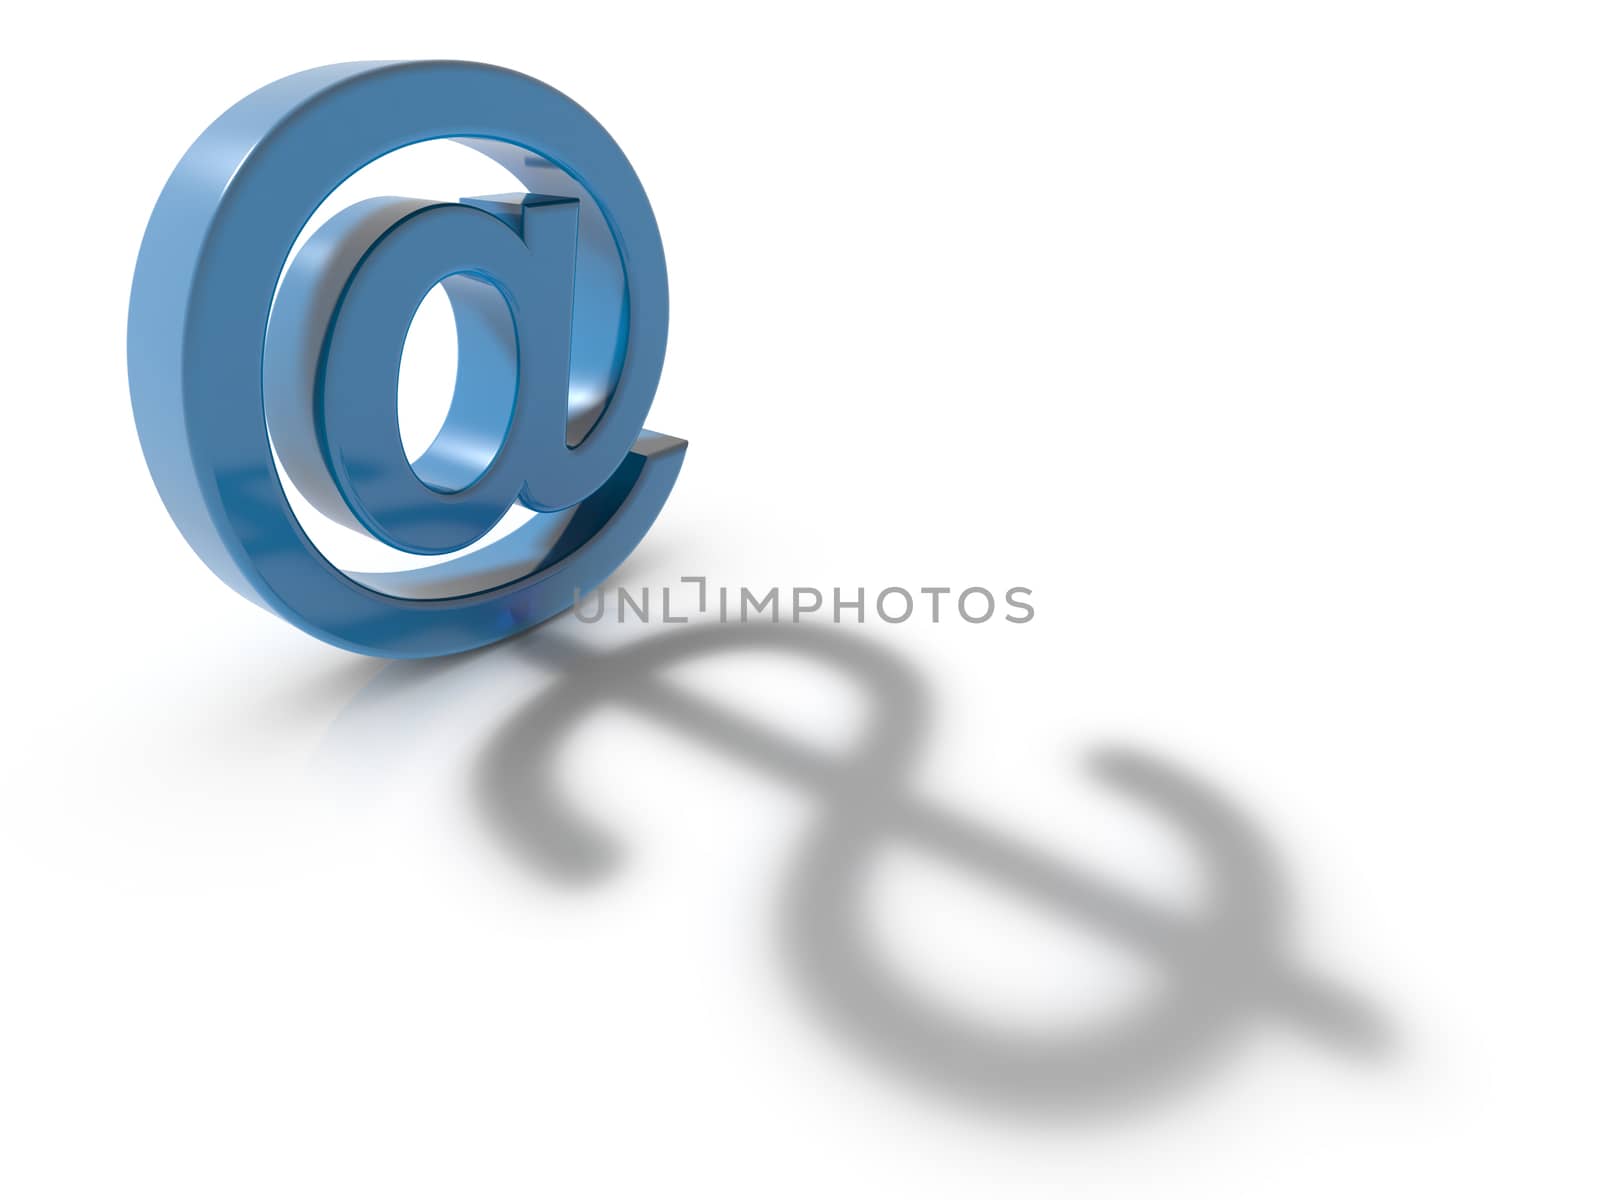 concept for E-Commerce of a email address symbol and a dollar symbol combined